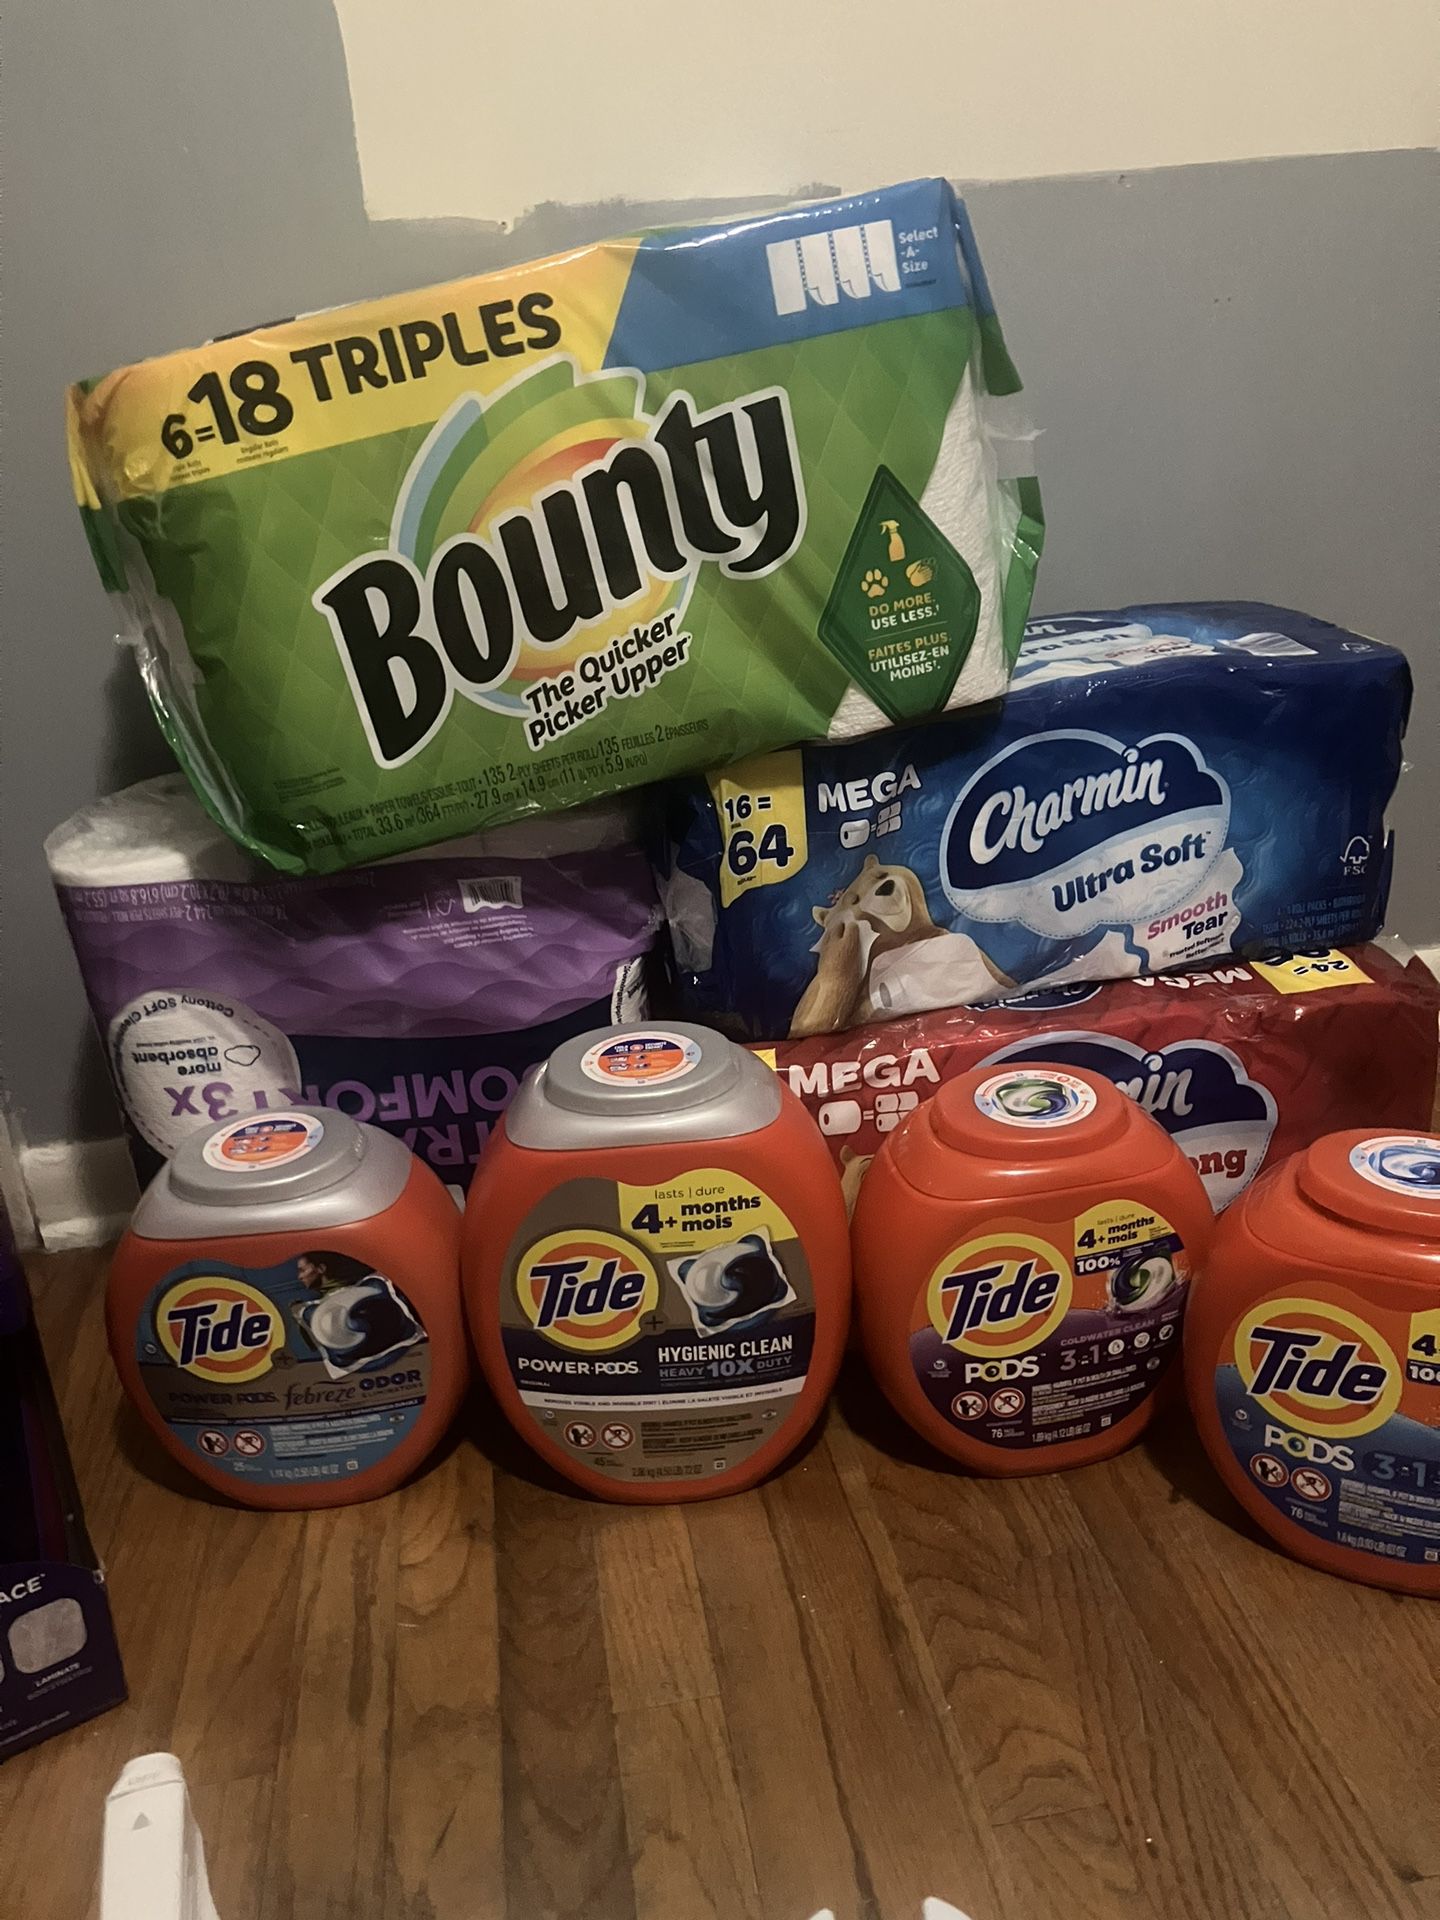 Cleaning supplies and smell goods